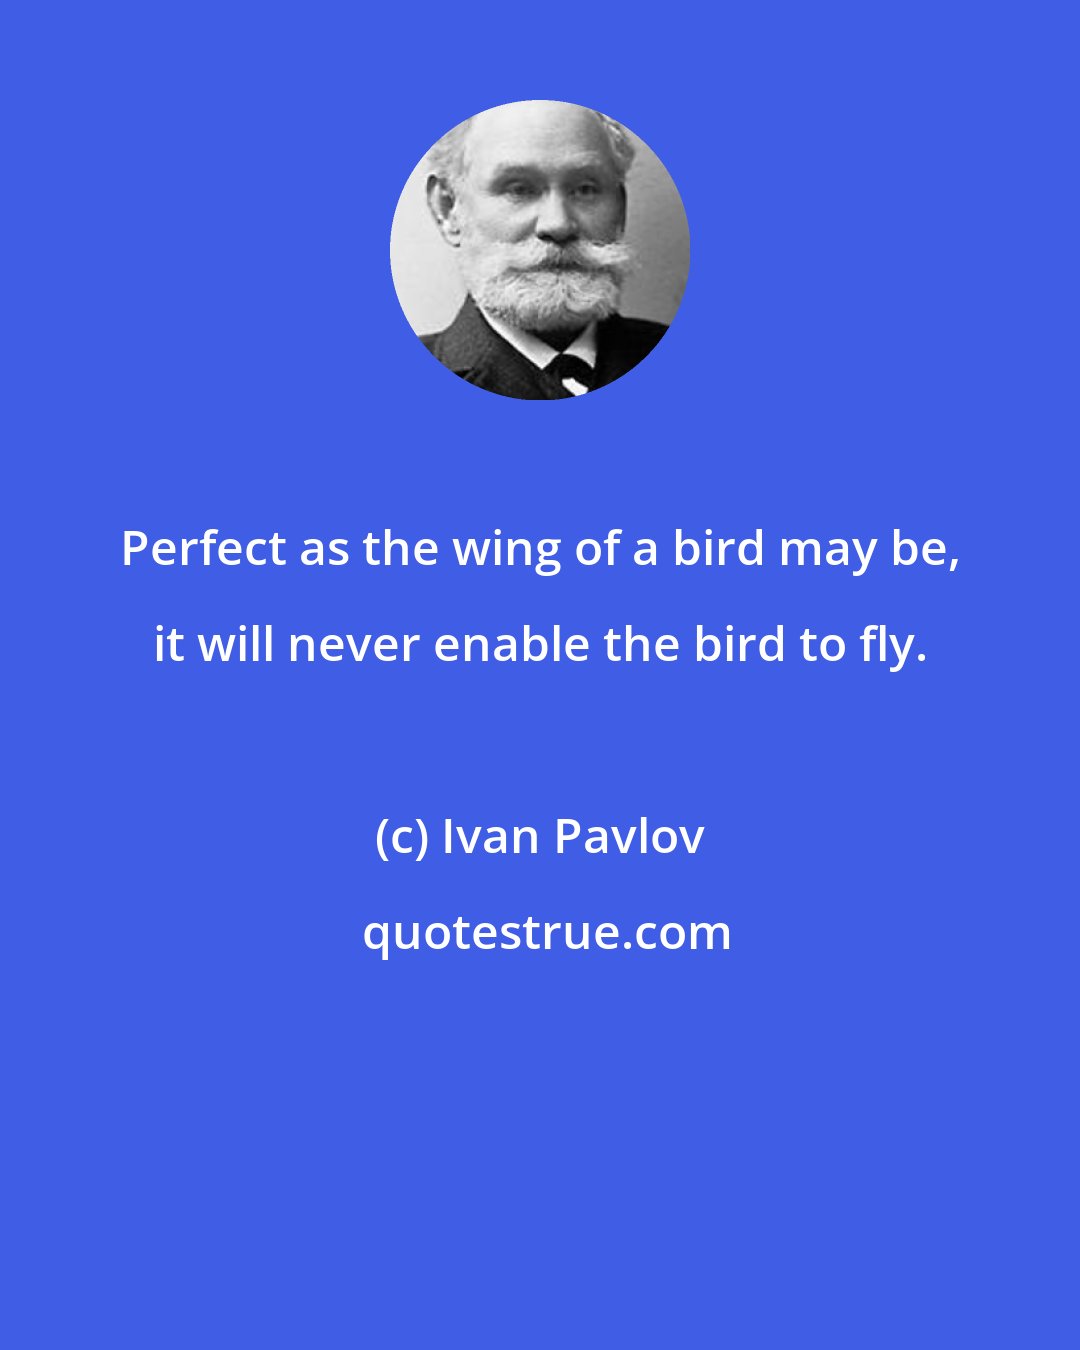 Ivan Pavlov: Perfect as the wing of a bird may be, it will never enable the bird to fly.